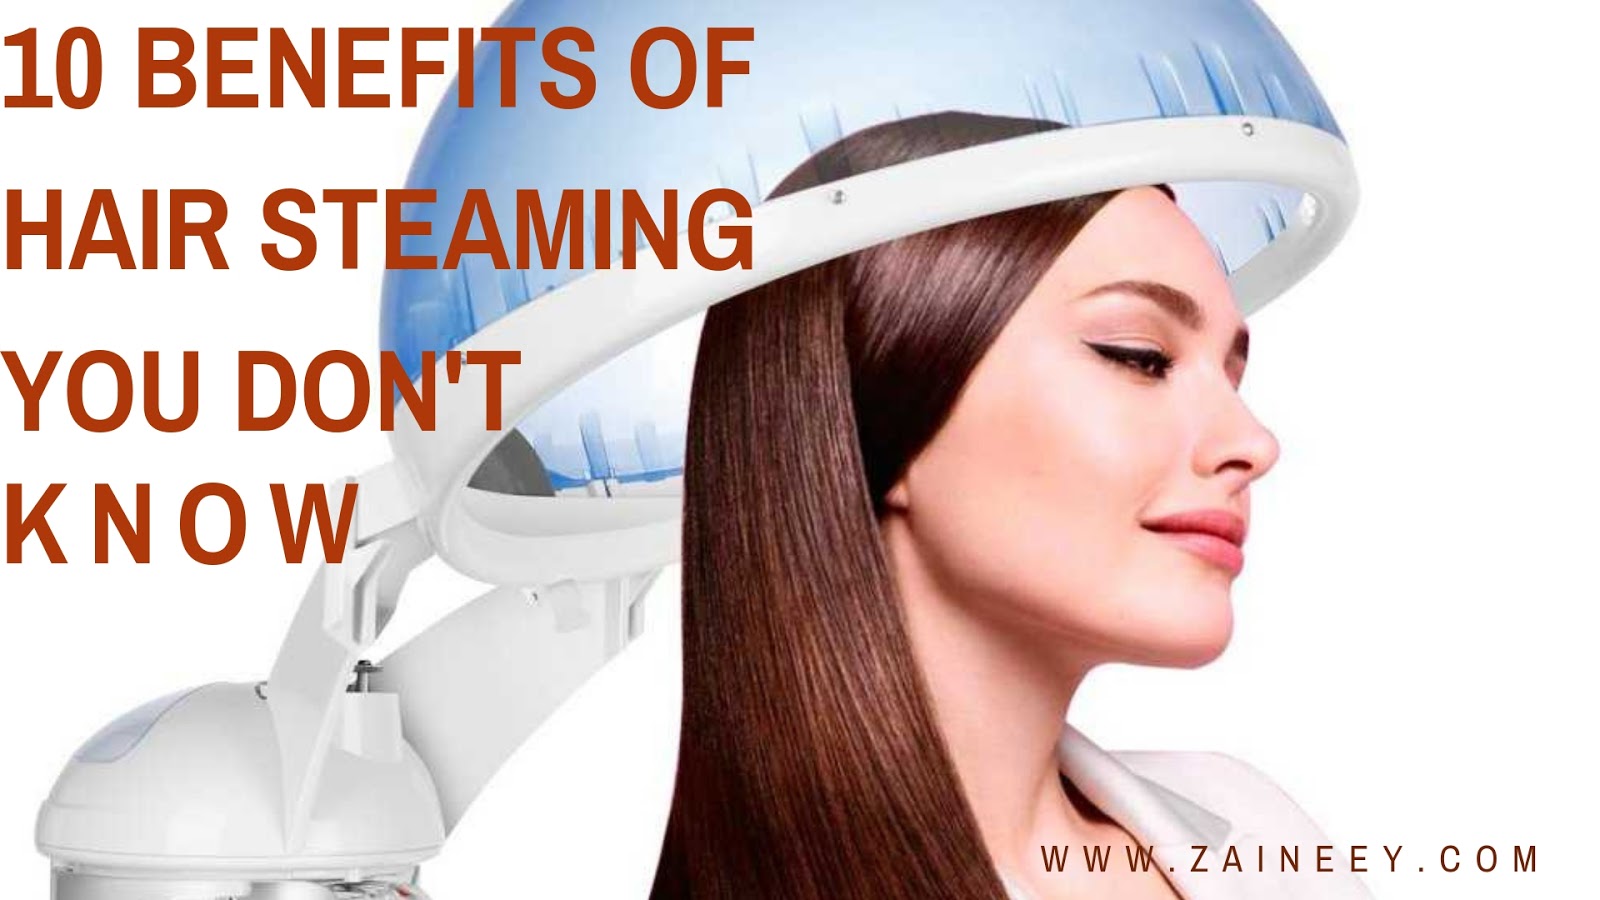 10 Benefits of Hair Steaming You Don't Know | Zaineey's Blog